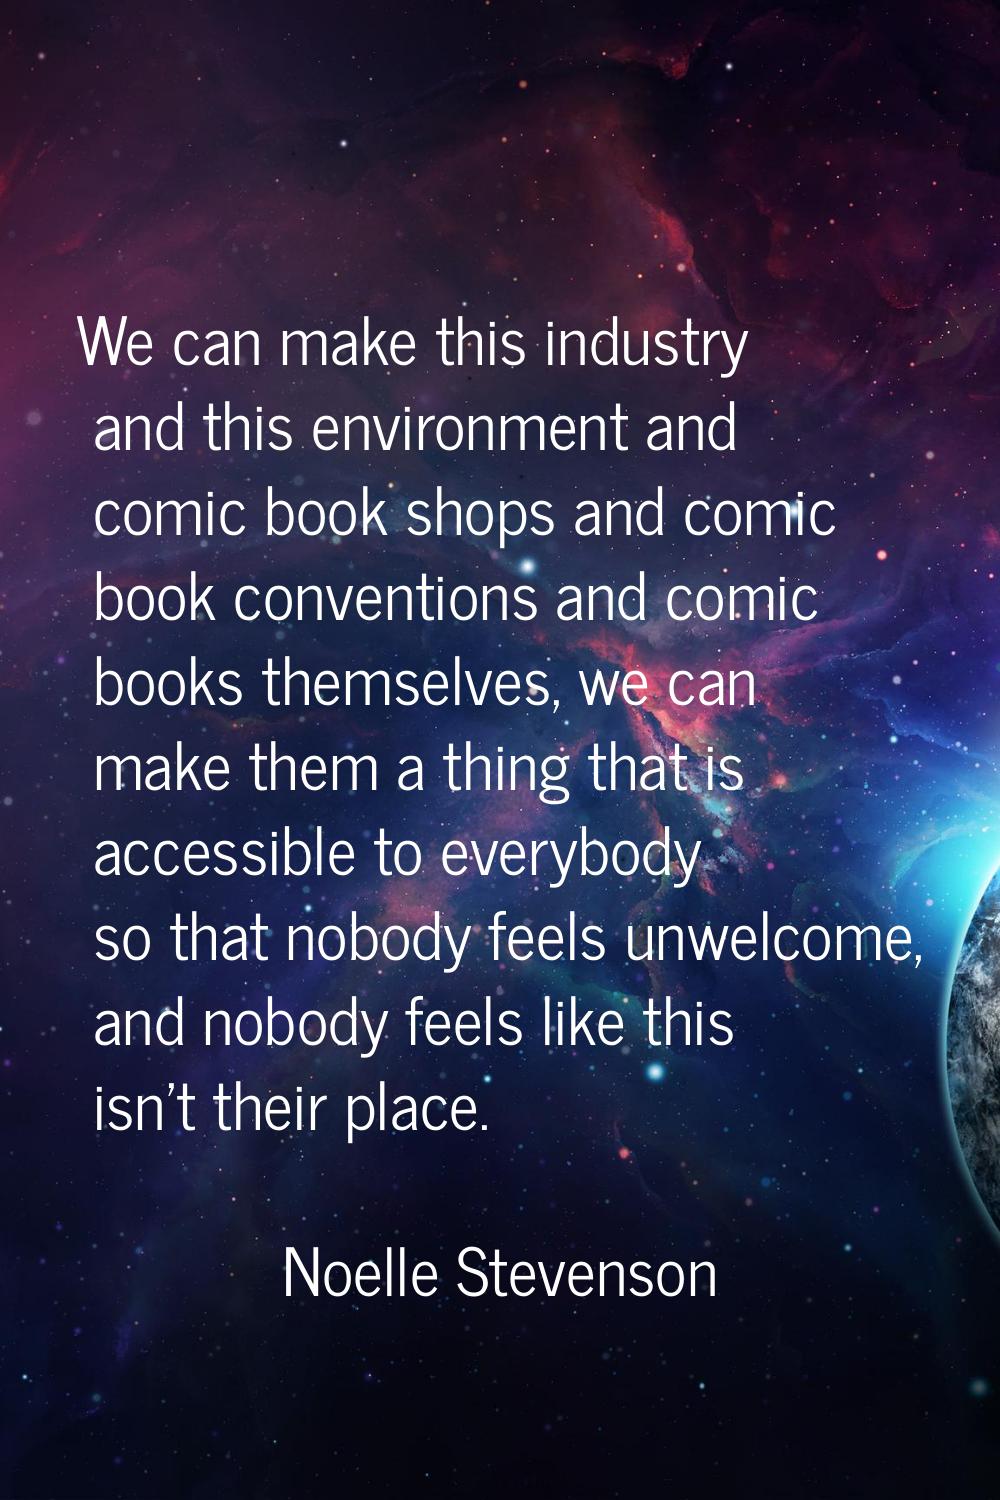 We can make this industry and this environment and comic book shops and comic book conventions and 